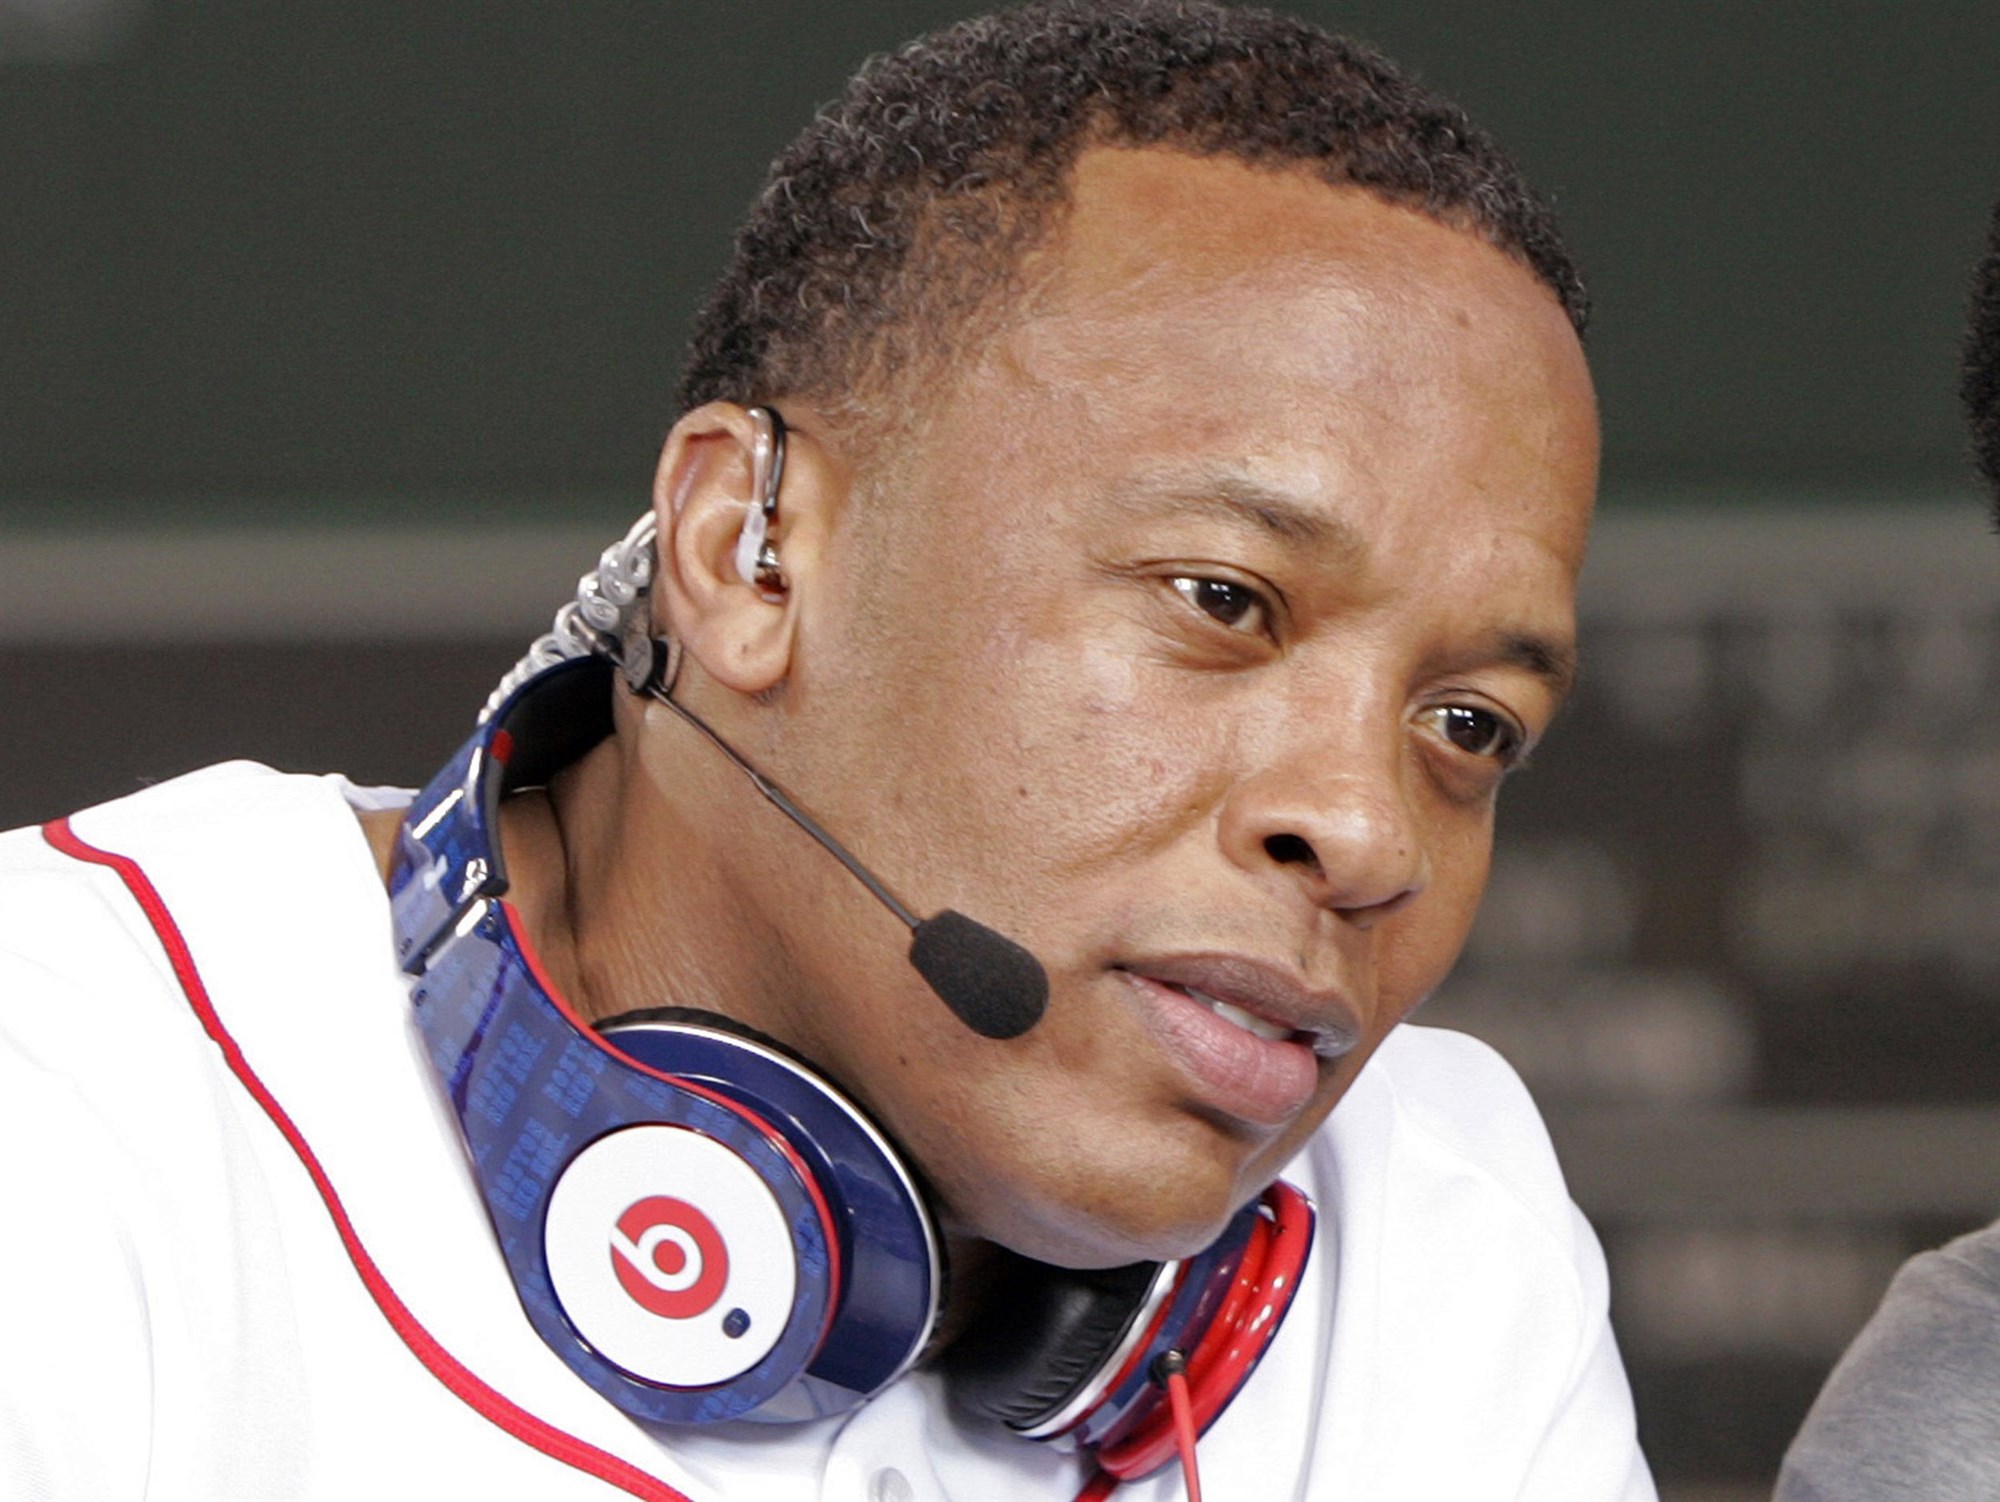 Dr. Dre, rapper turned entrepreneur, earned $950 million in the past decade - deals in retail